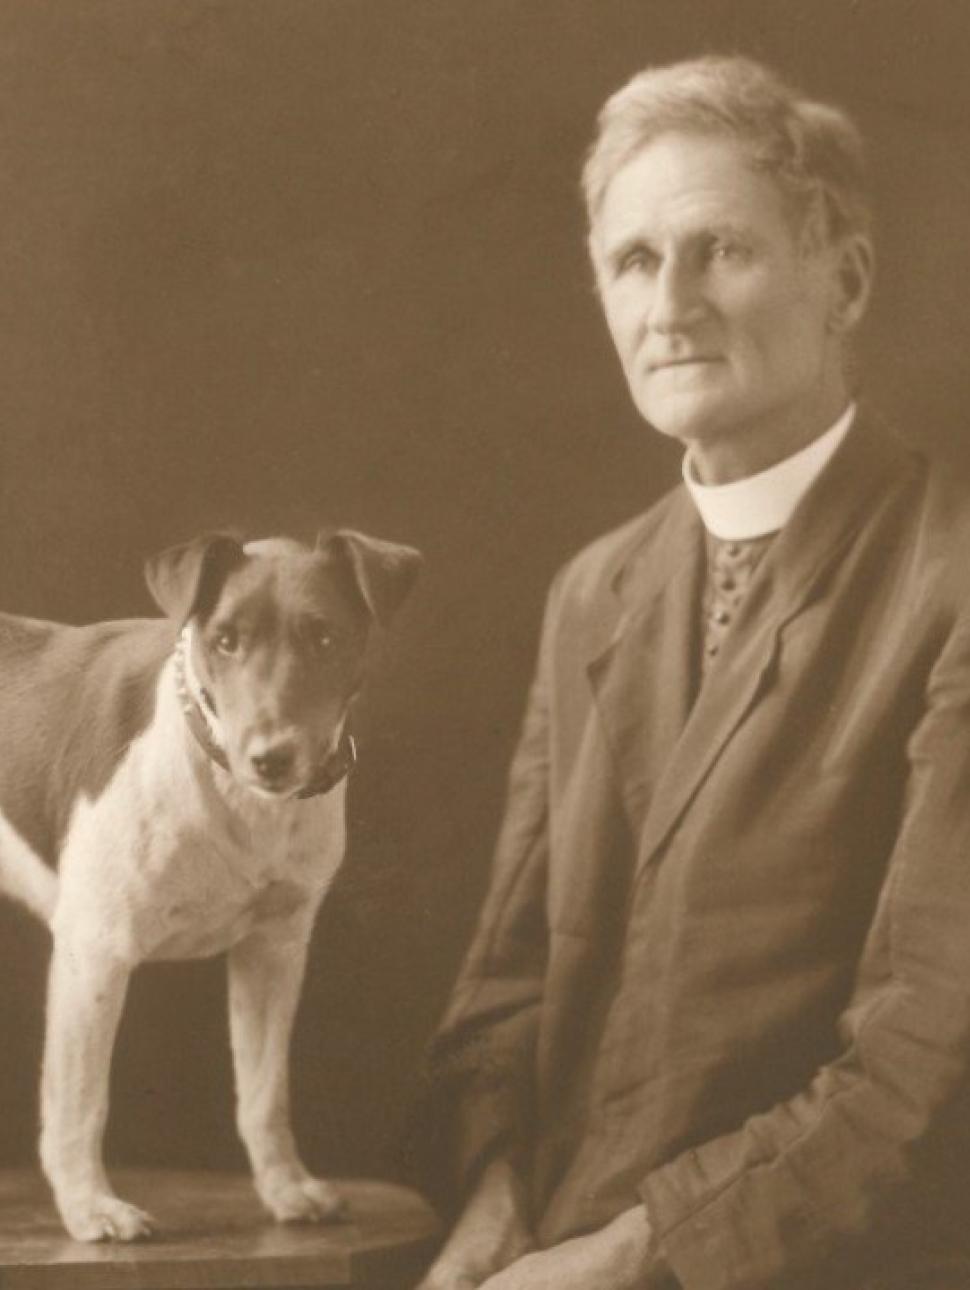 An old sepia toned portrait of a middle-aged man in formal clothing and a small dog